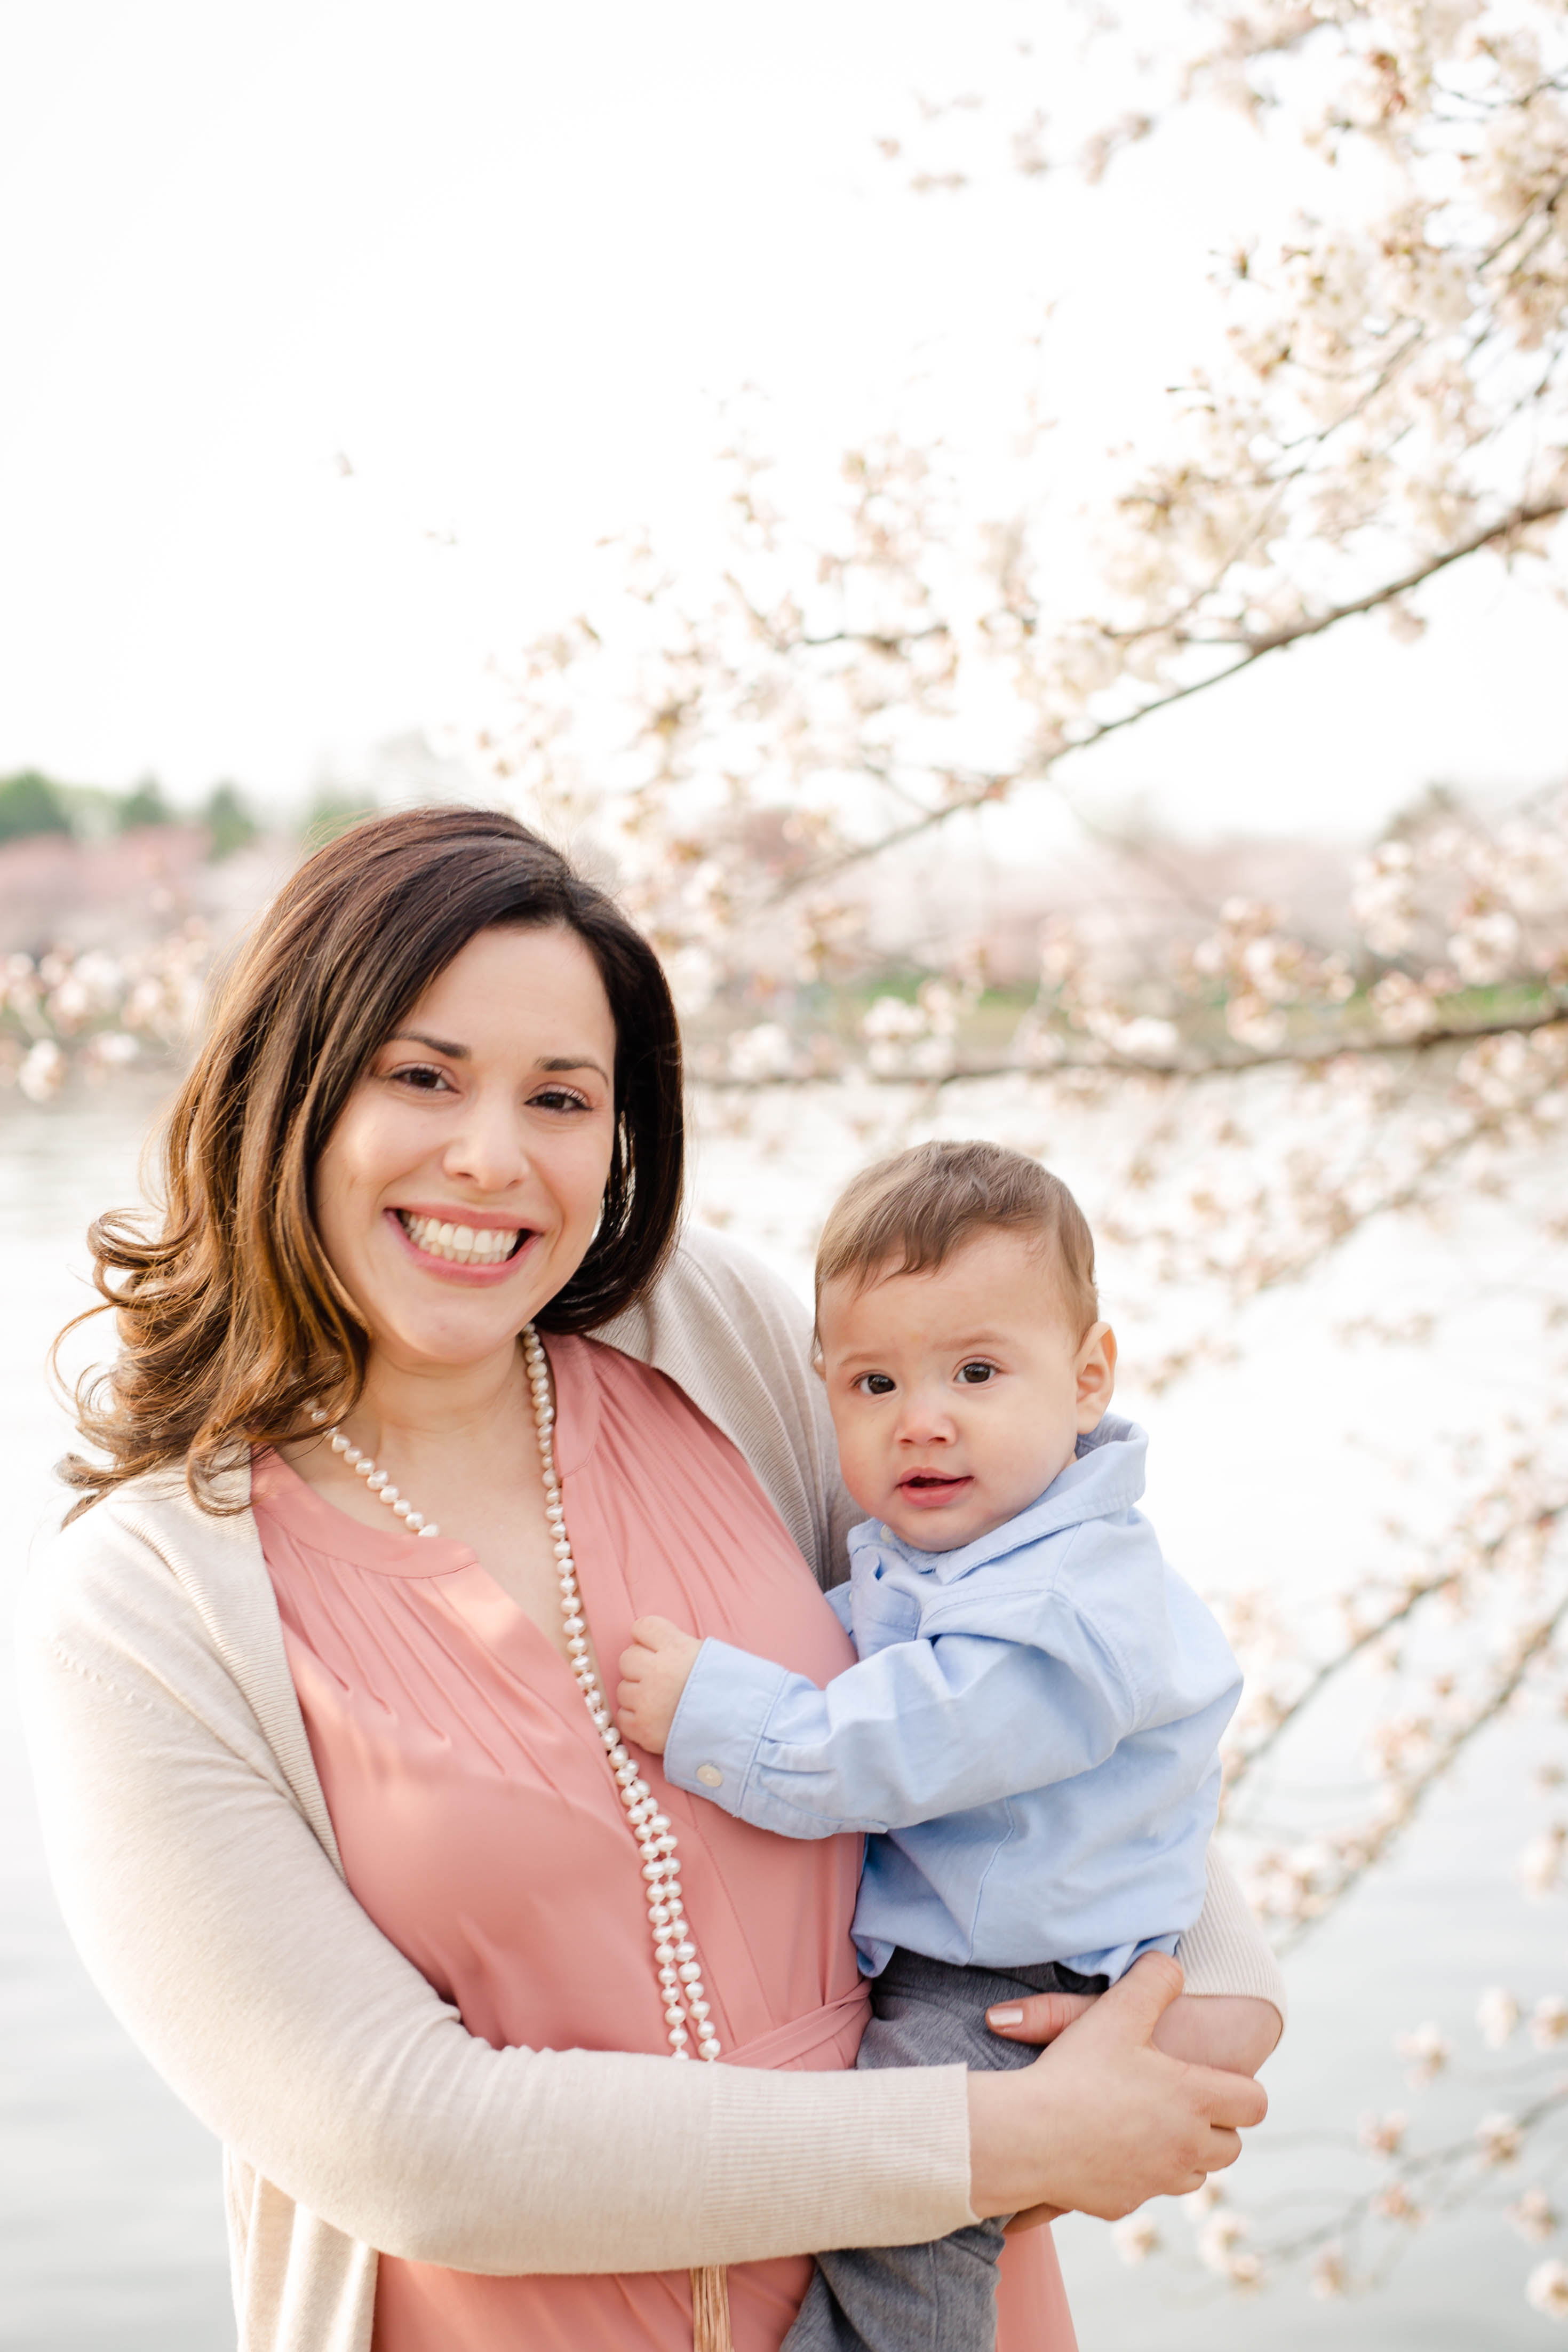 Family Photos - The Wintters at Cherry Blossoms | Rachel E.H. Photography2939 x 4408